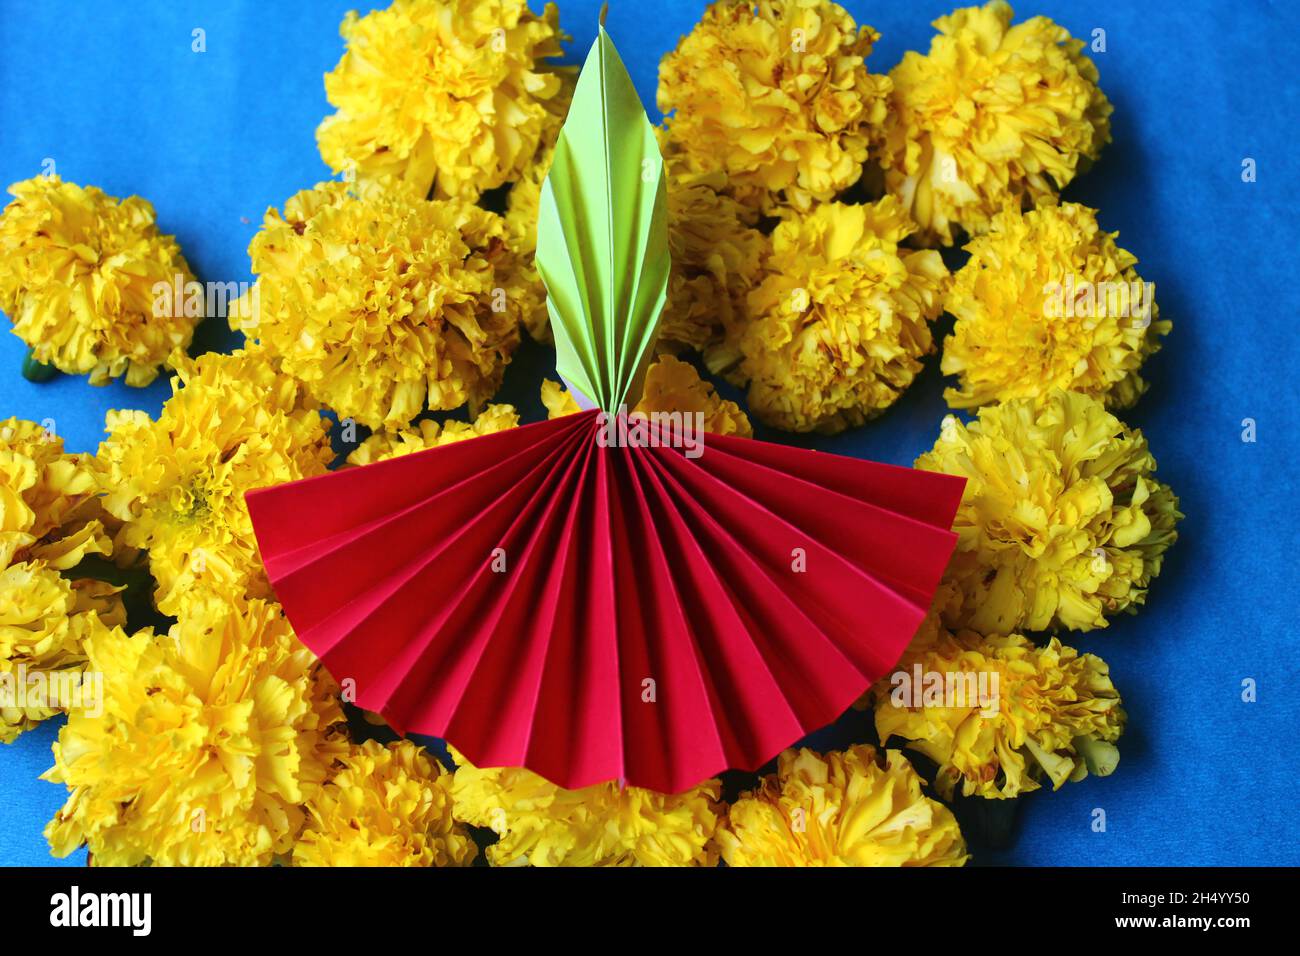 Diwali diya made with origami paper and fresh marigold flowers on blue background Stock Photo